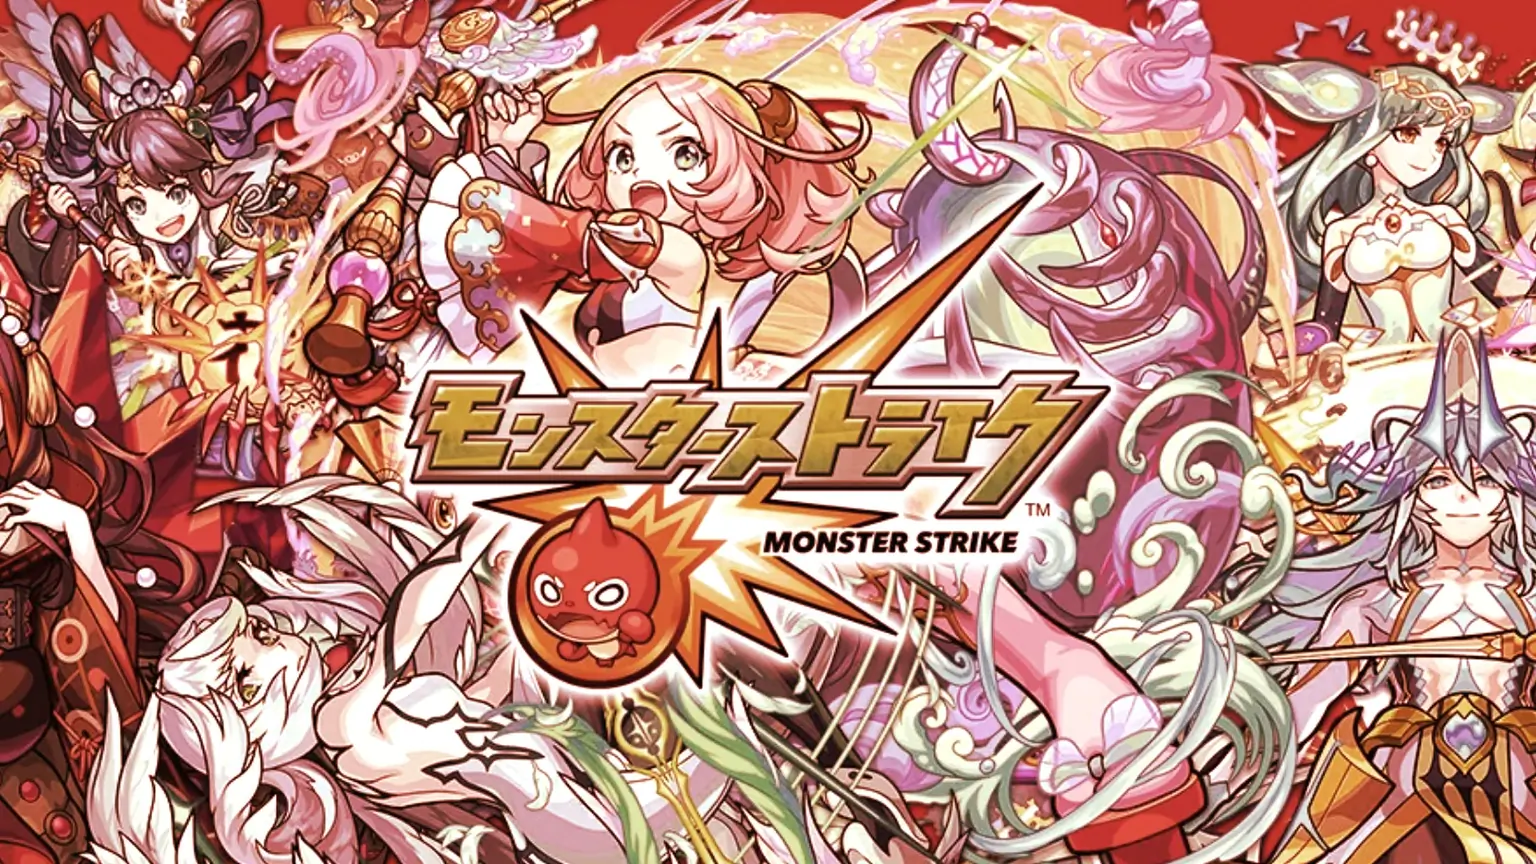 Mixi is the Japanese company behind Monster Strike. Image: Mixi